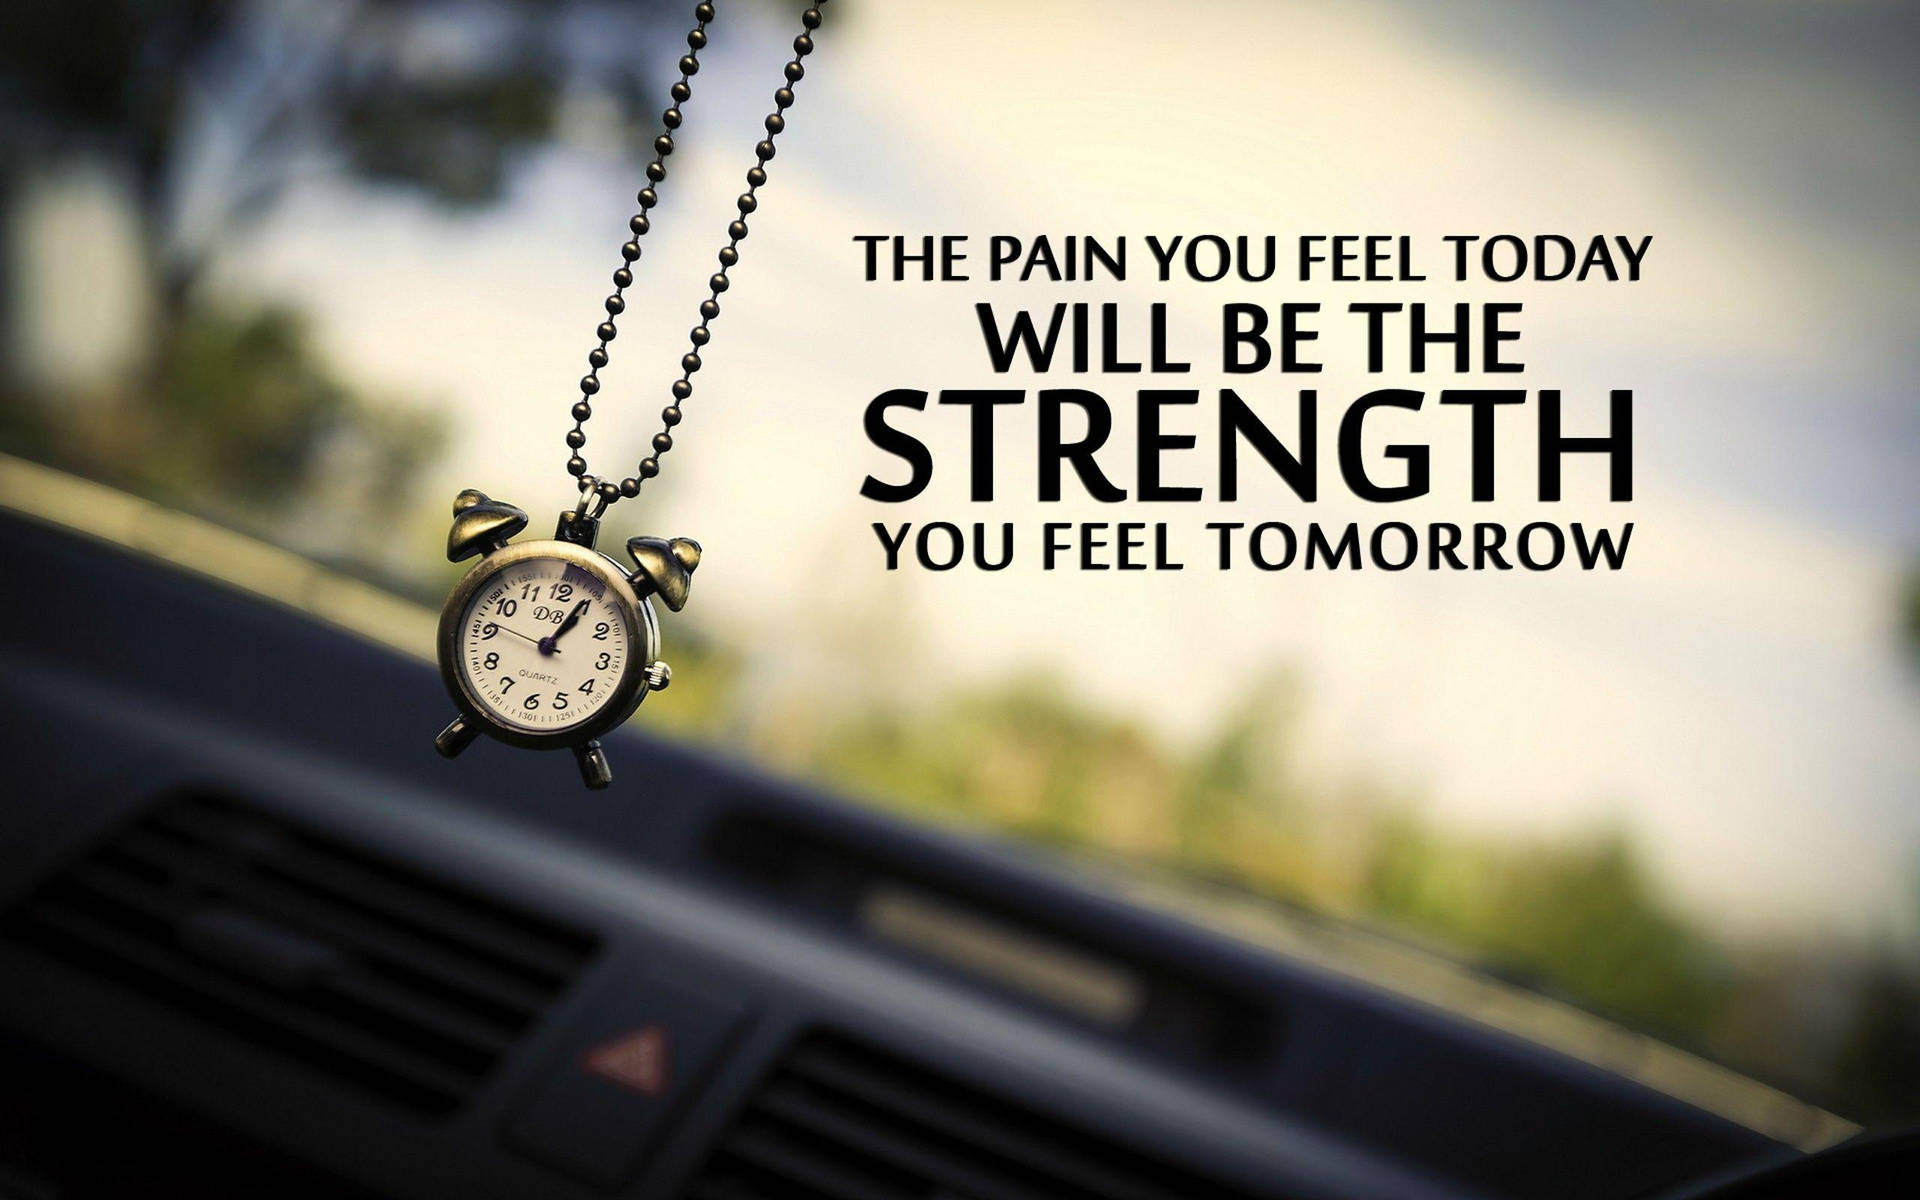 Motivational Hd Image Giving Strength